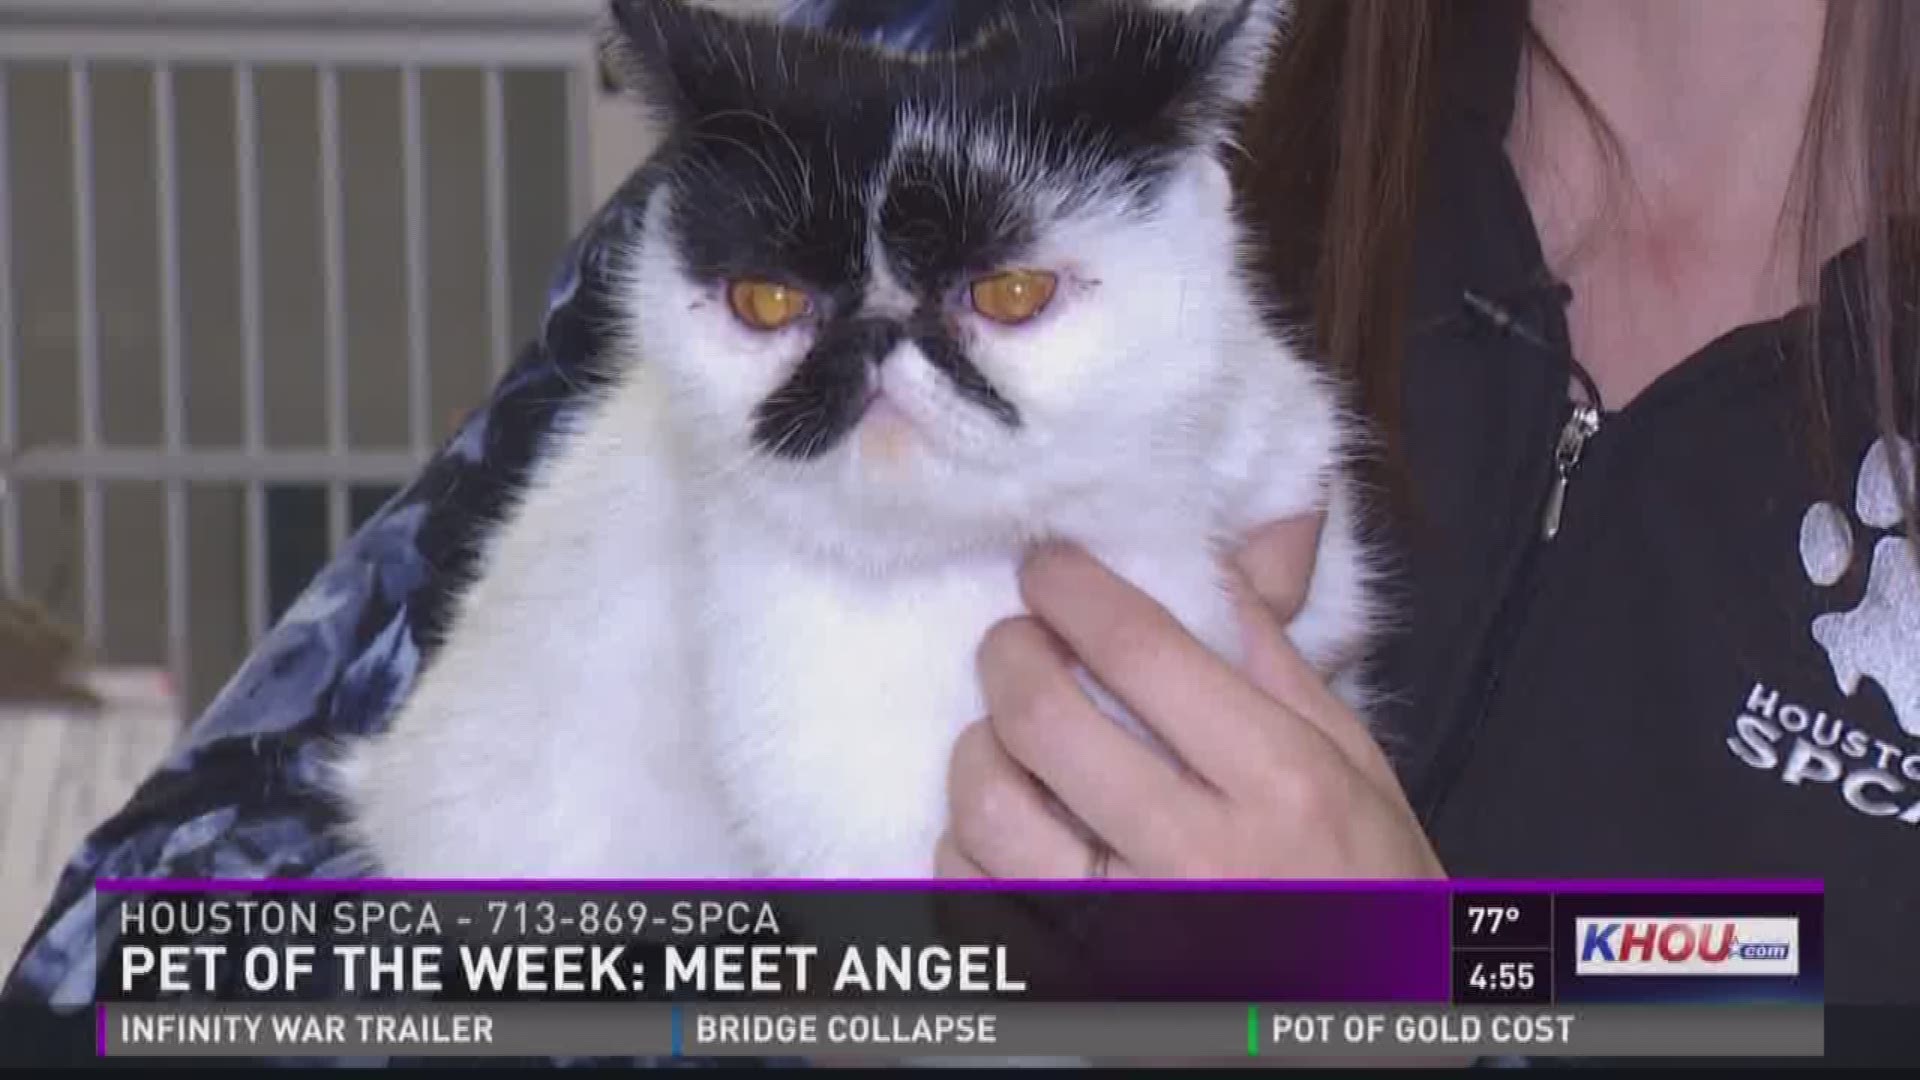 Our Pet of the Week is an exotic short-hair named Angel. The breed is called the "Lazy Man's Persian" because you don't have to brush them as often. She is a lap cat that needs a loving home. For more, go to houstonspca.org